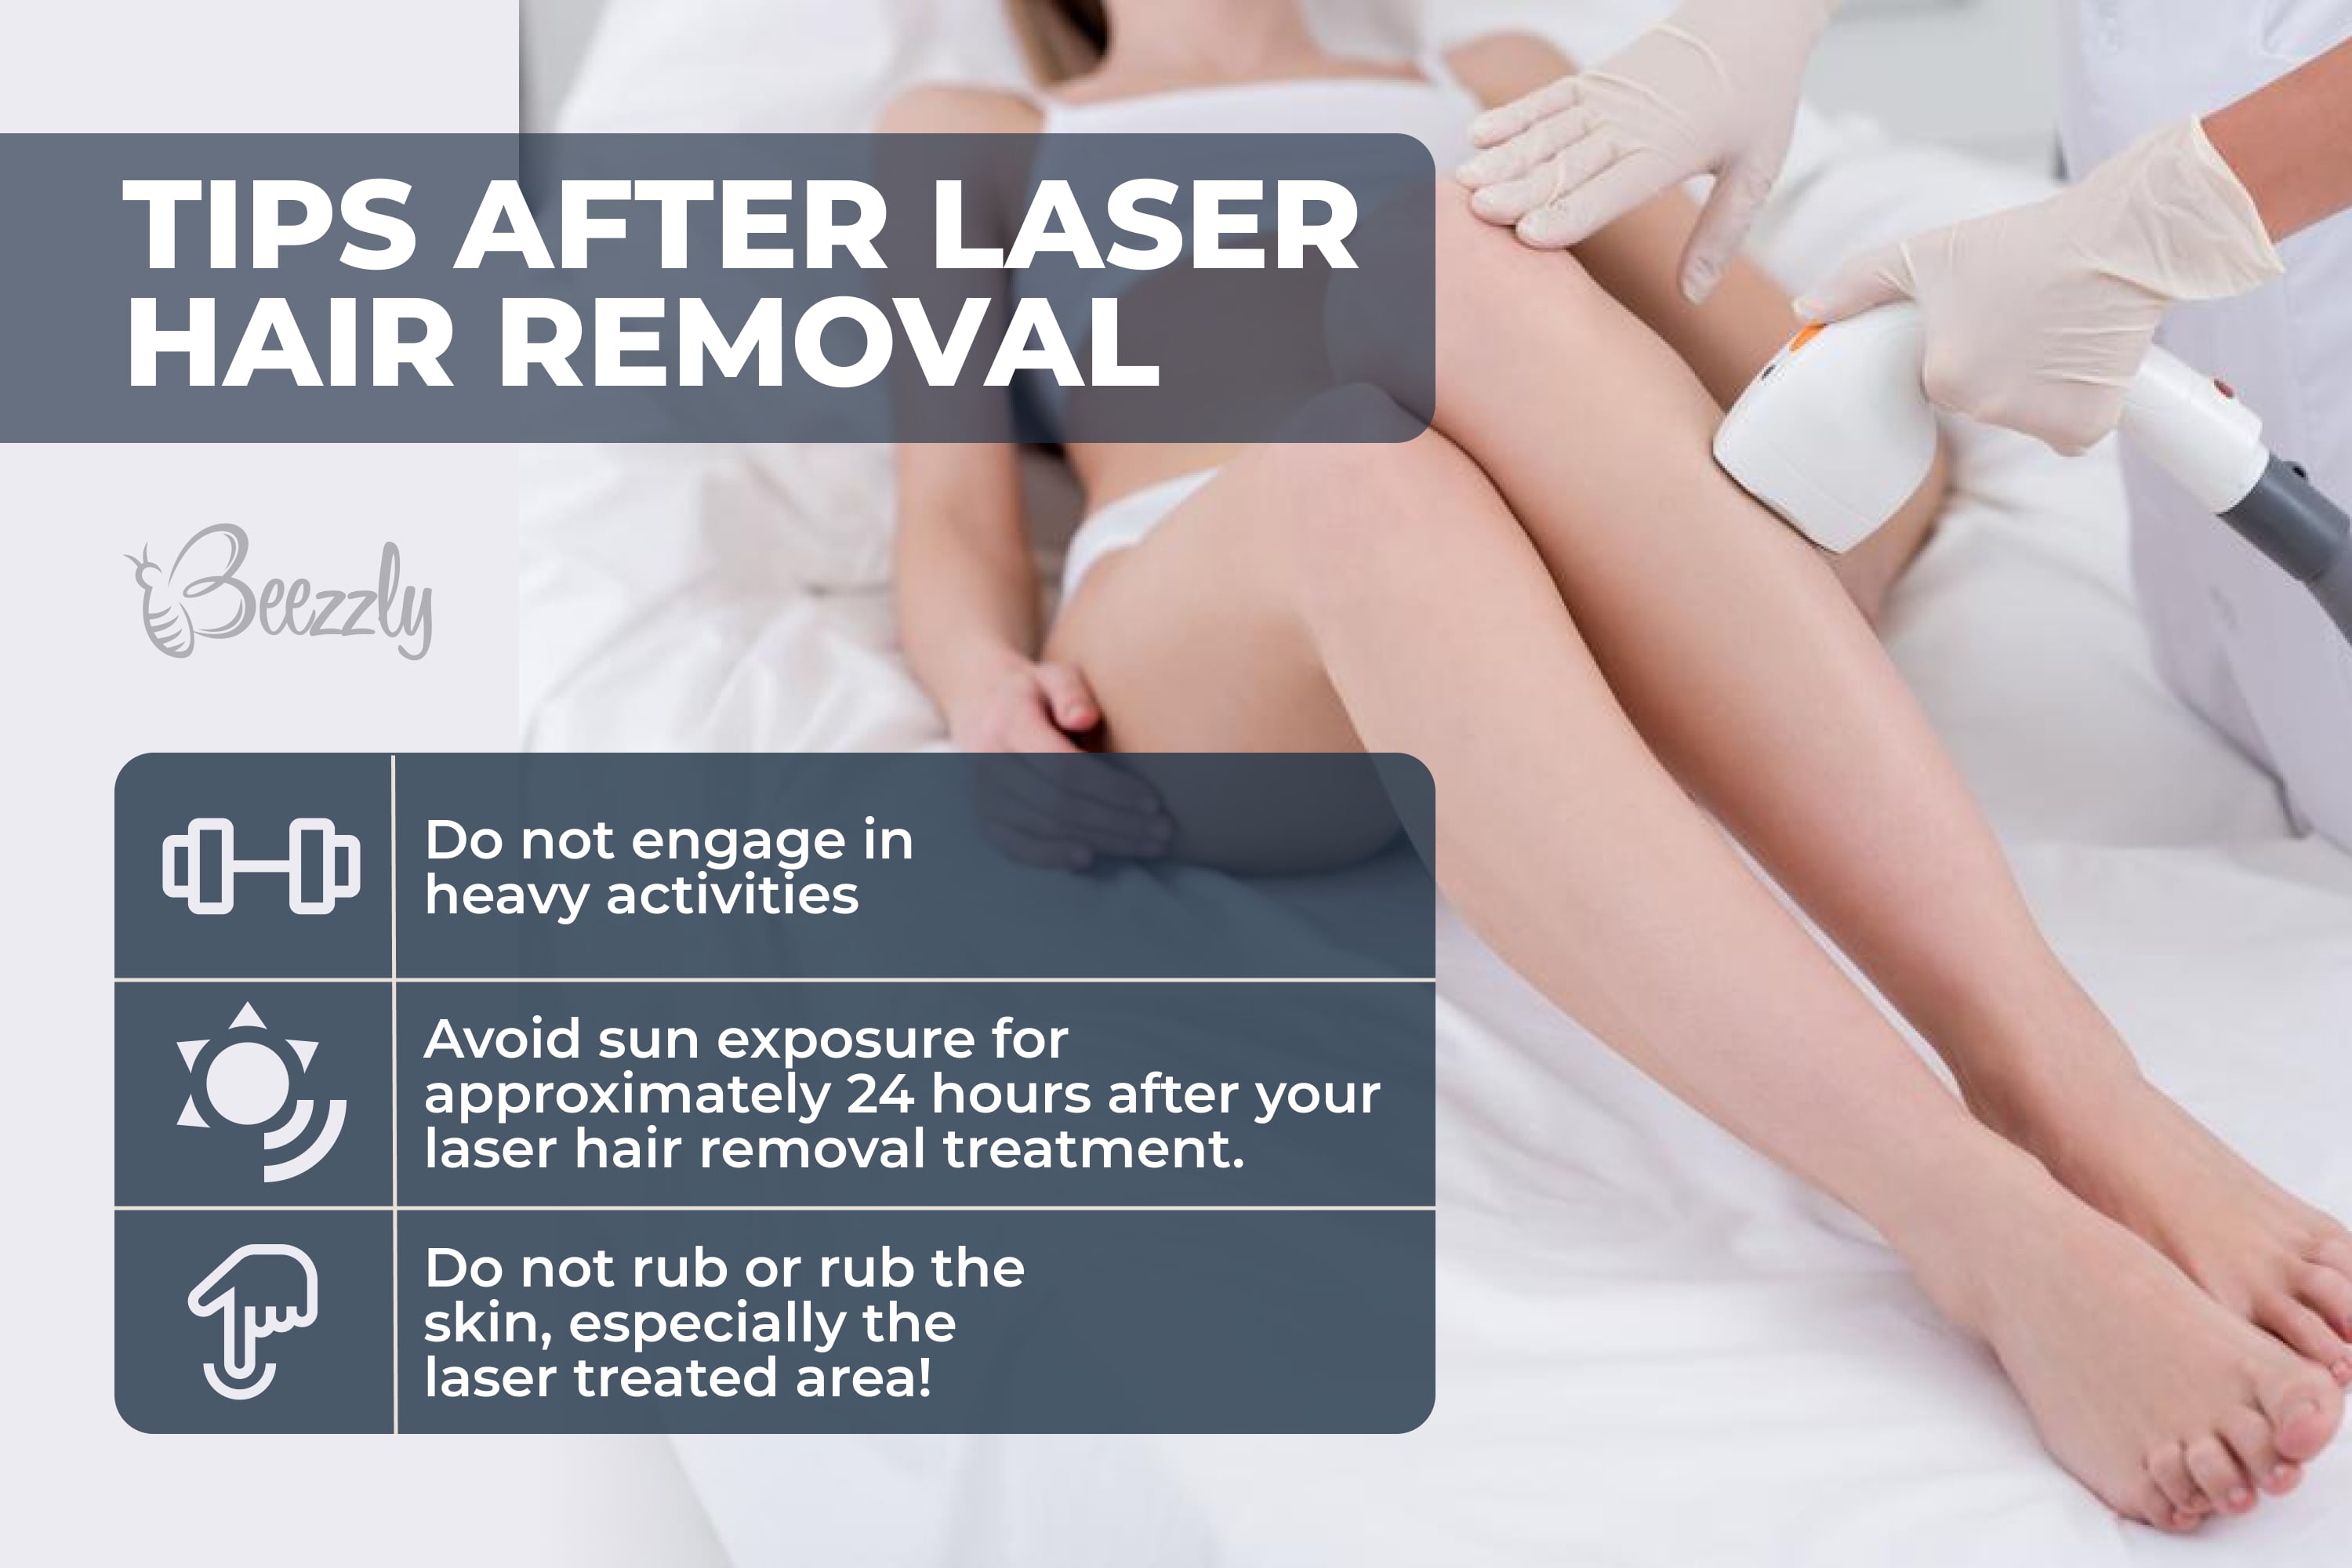 Tips after laser hair removal